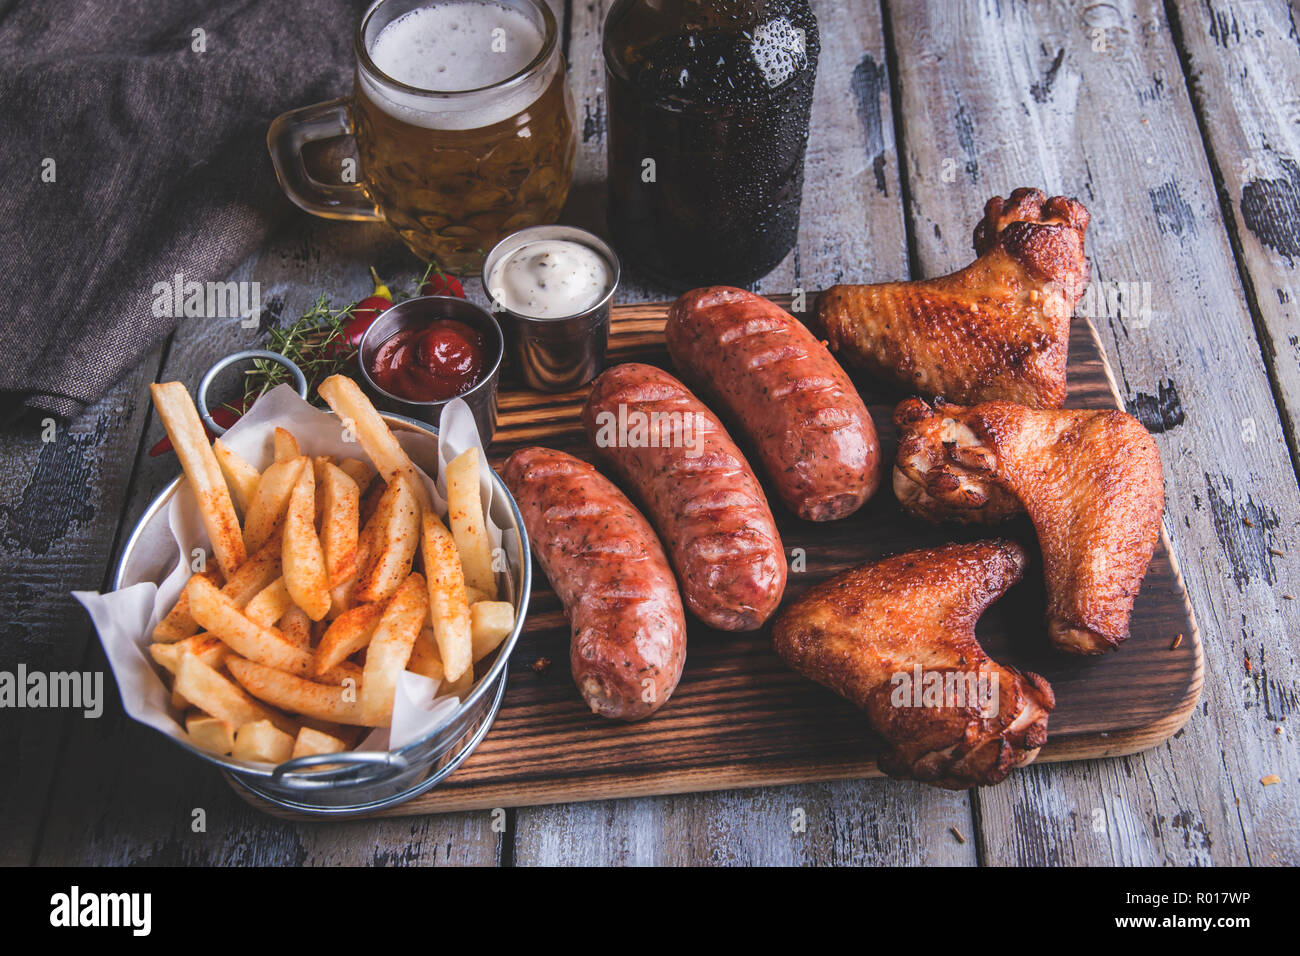 Fried chicken wings,grilled sausages, french fries, nuts, white and red sauce. food to beer Stock Photo